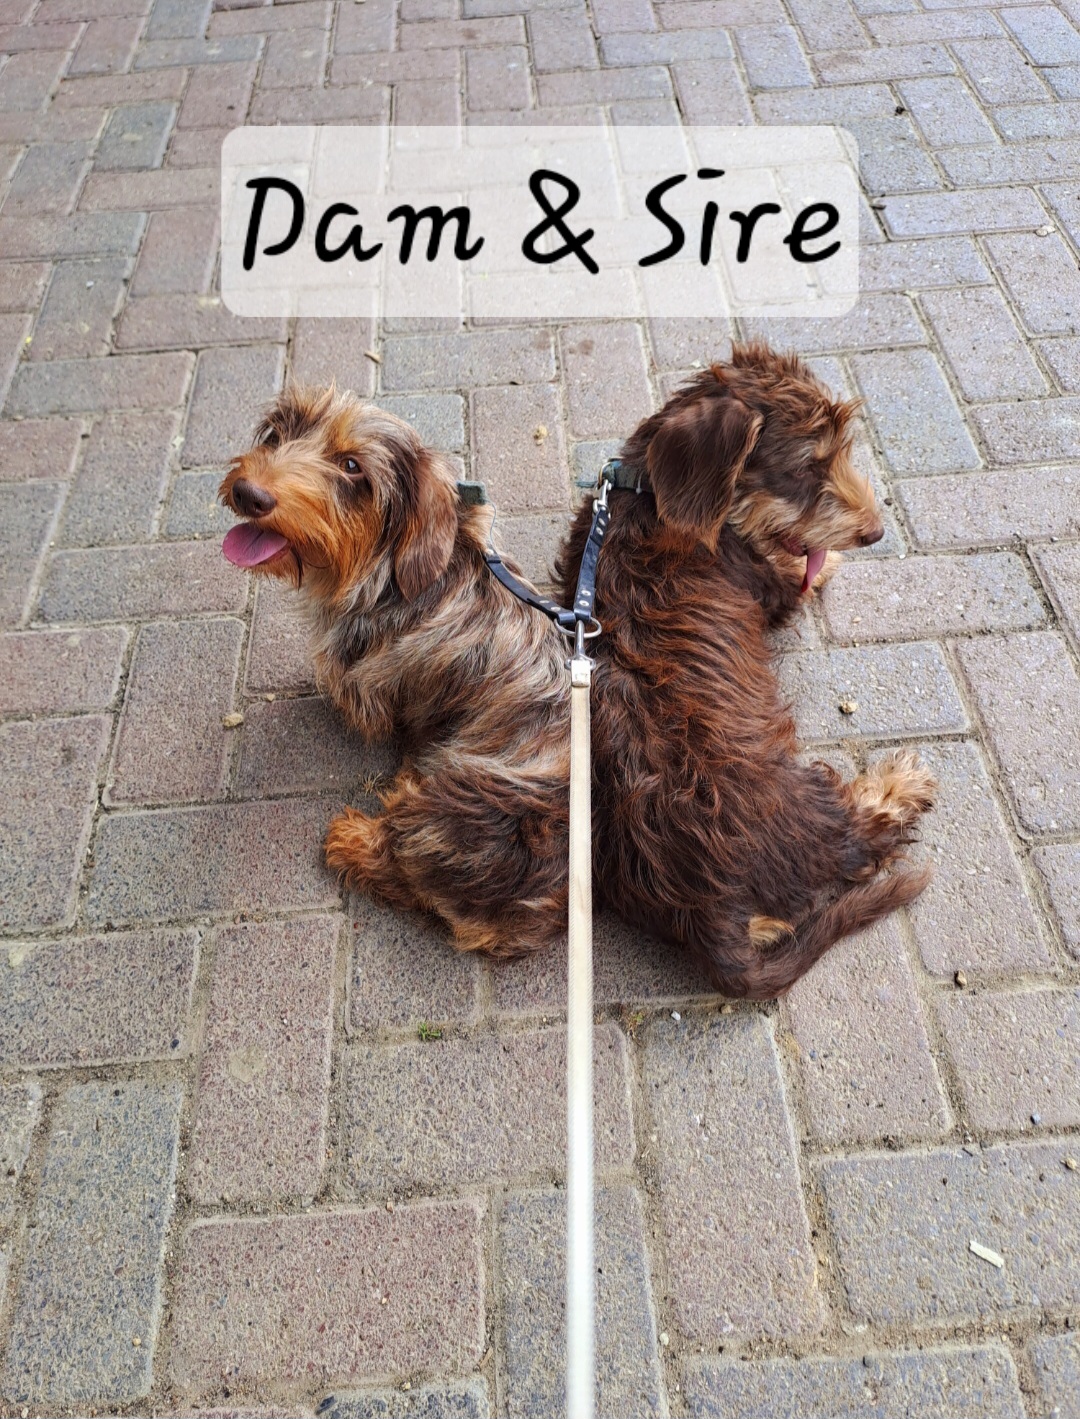 Dam and sire owned by me